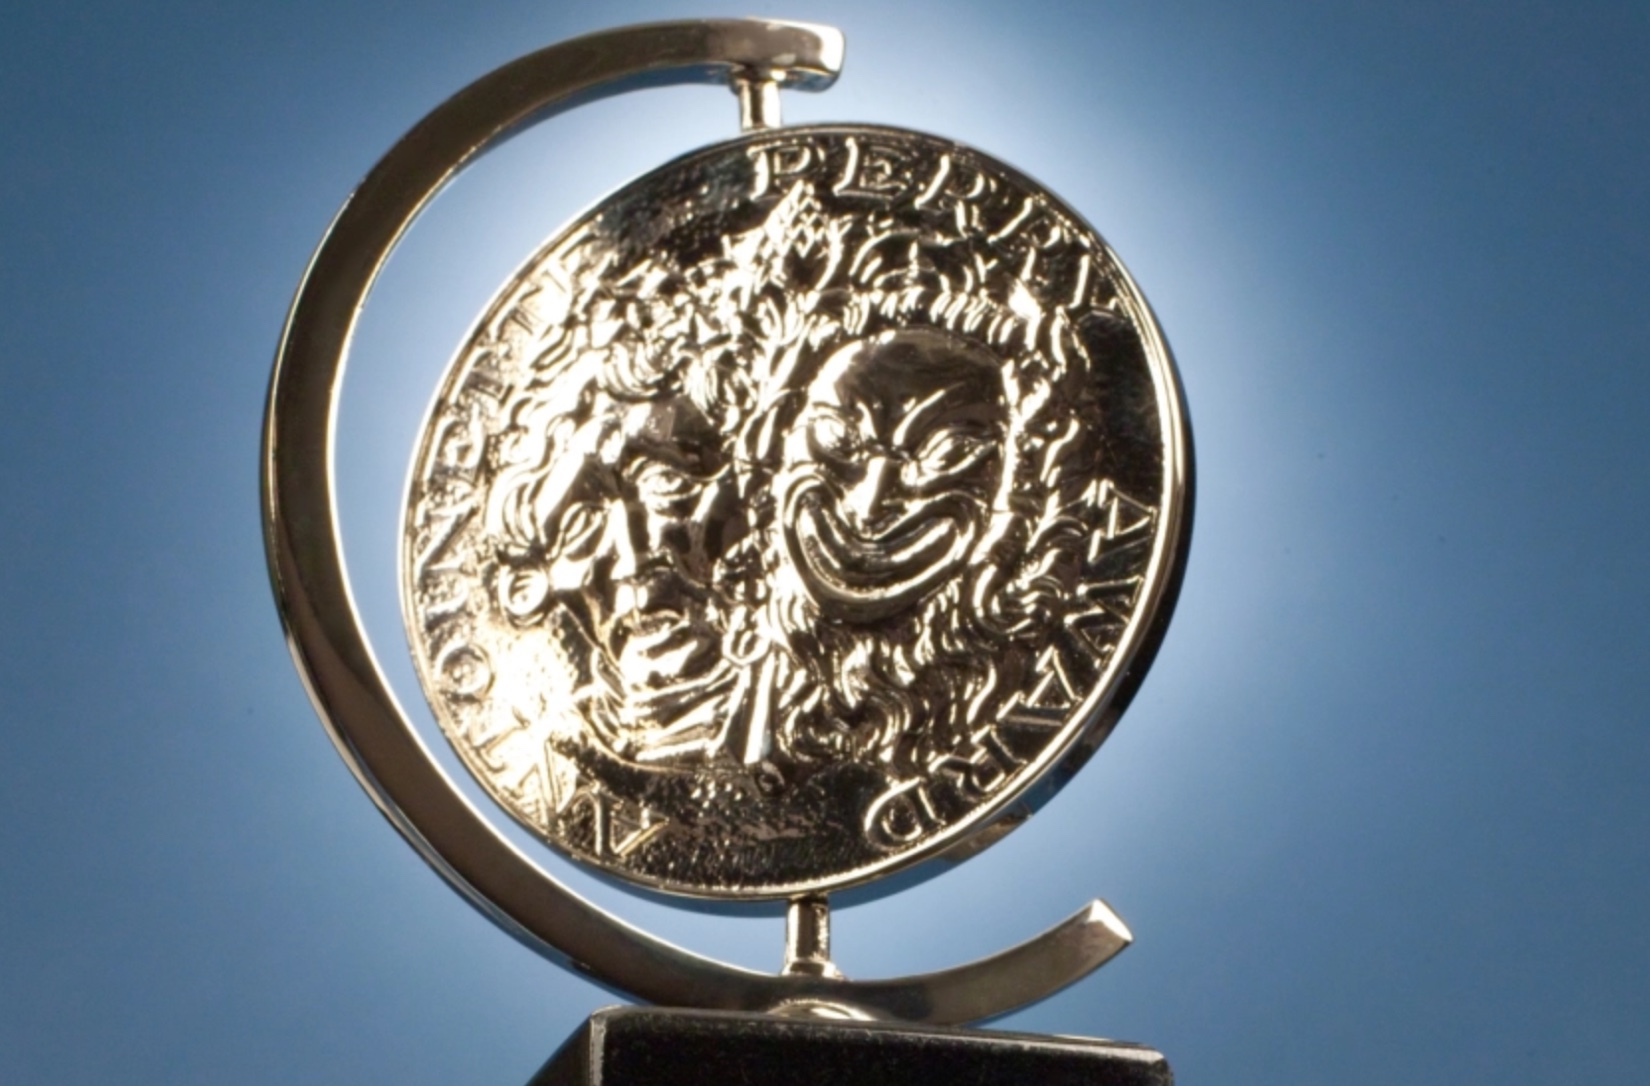 20192020 Tony Awards Nominating Committee Announced The American